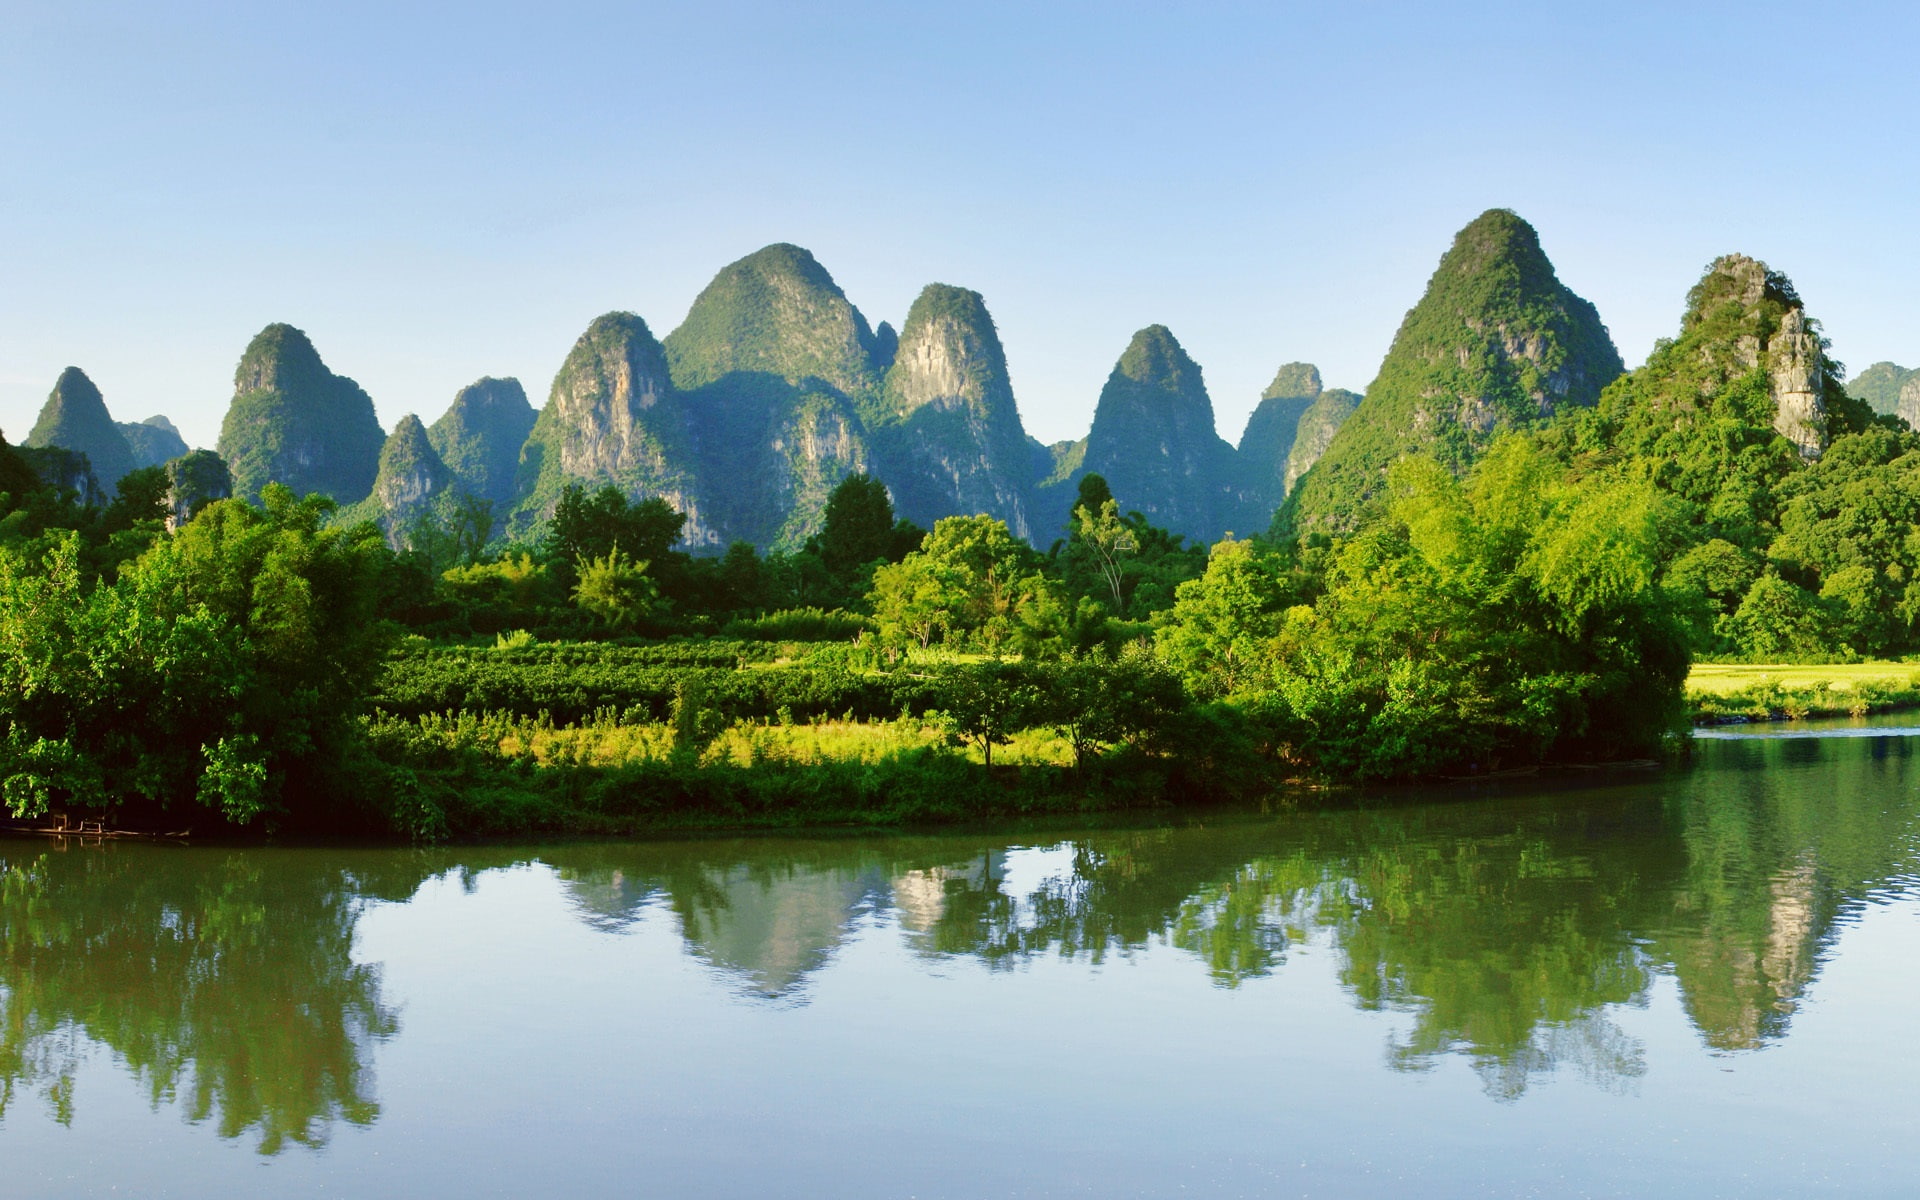 Guilin, Yangshuo landscape, China, mountains, river, water reflection